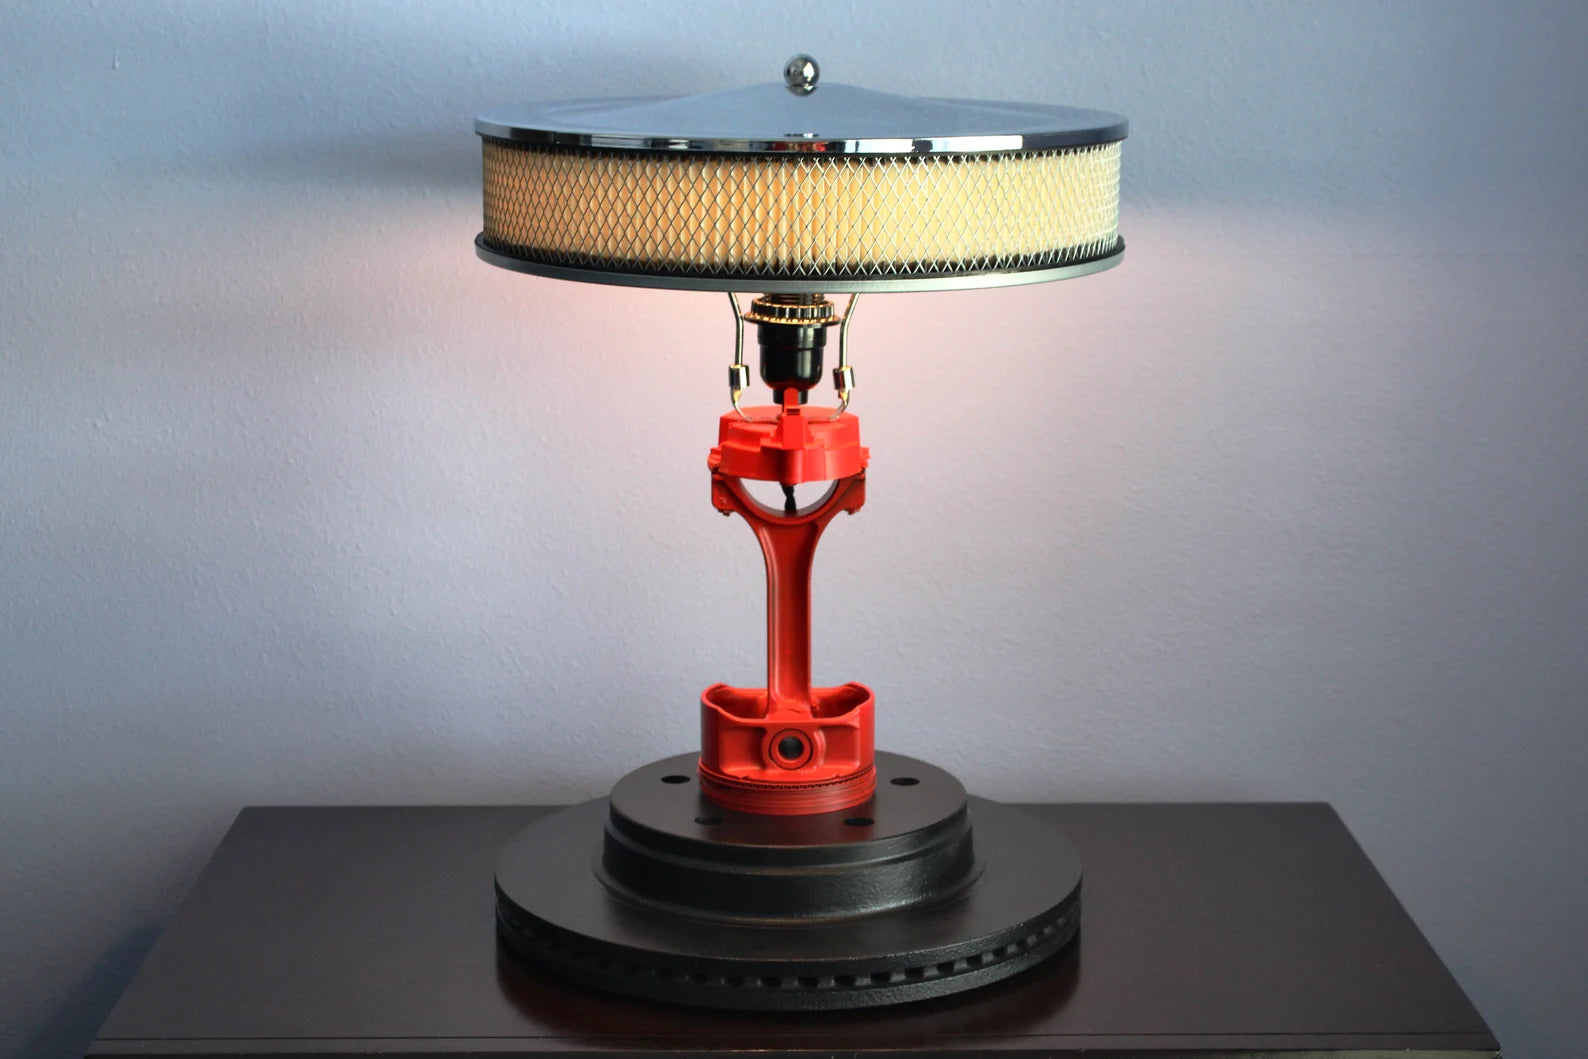 Piston and Air Filter Desk Lamp - Chrome Air Filter